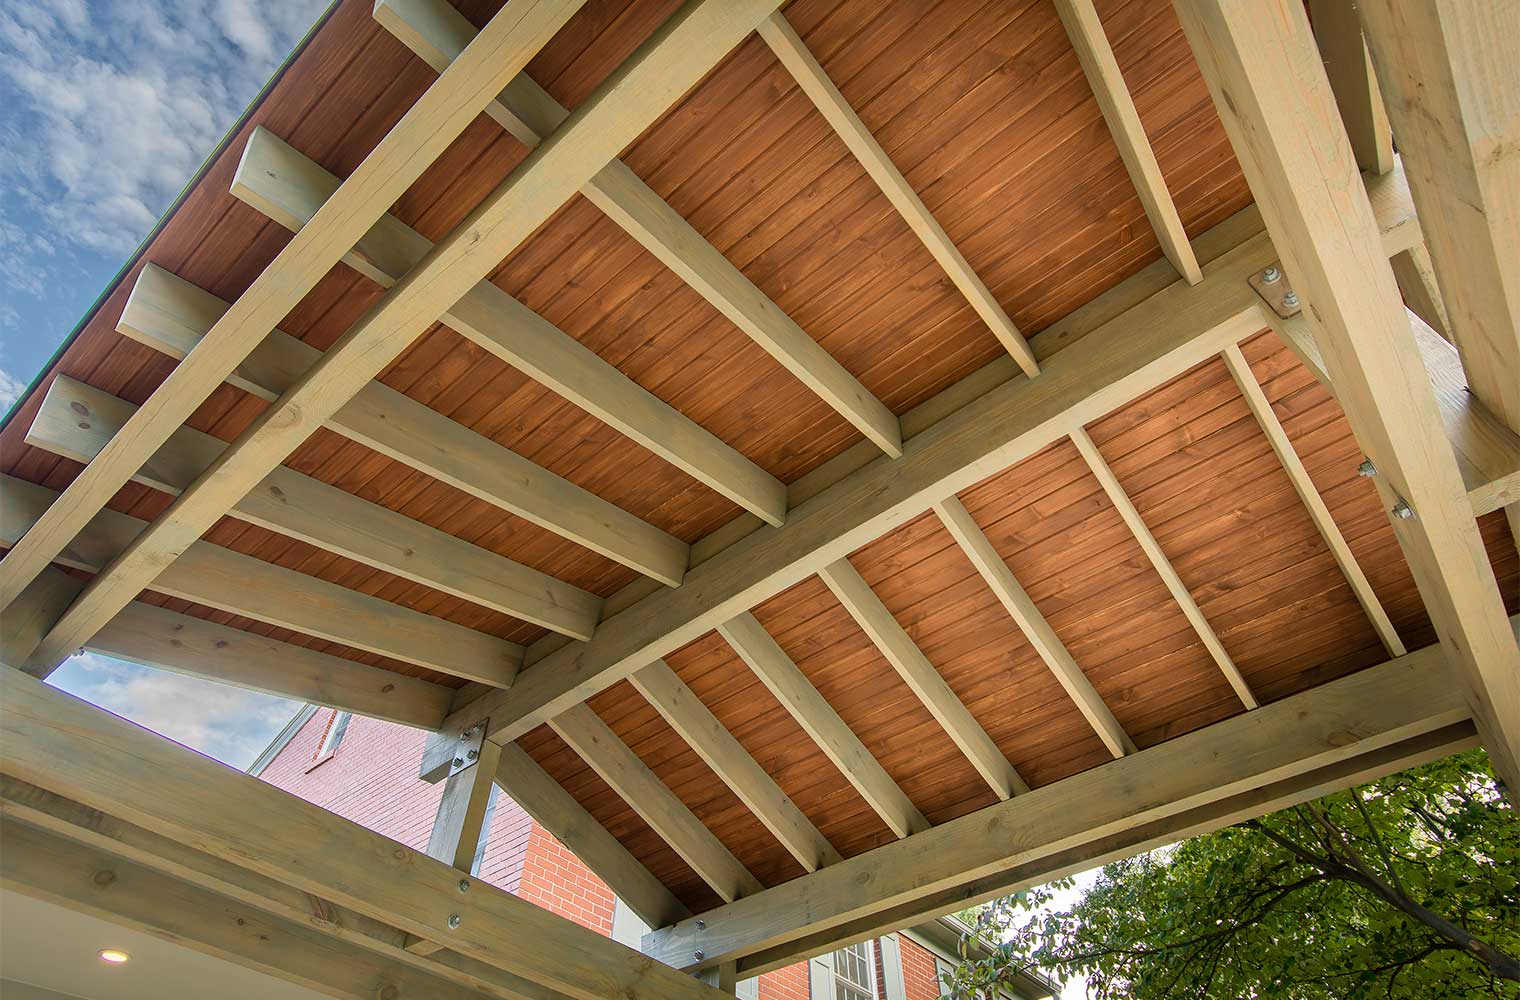 underside of new carport in a warm stain with gray stain timber frame by Silent Rivers